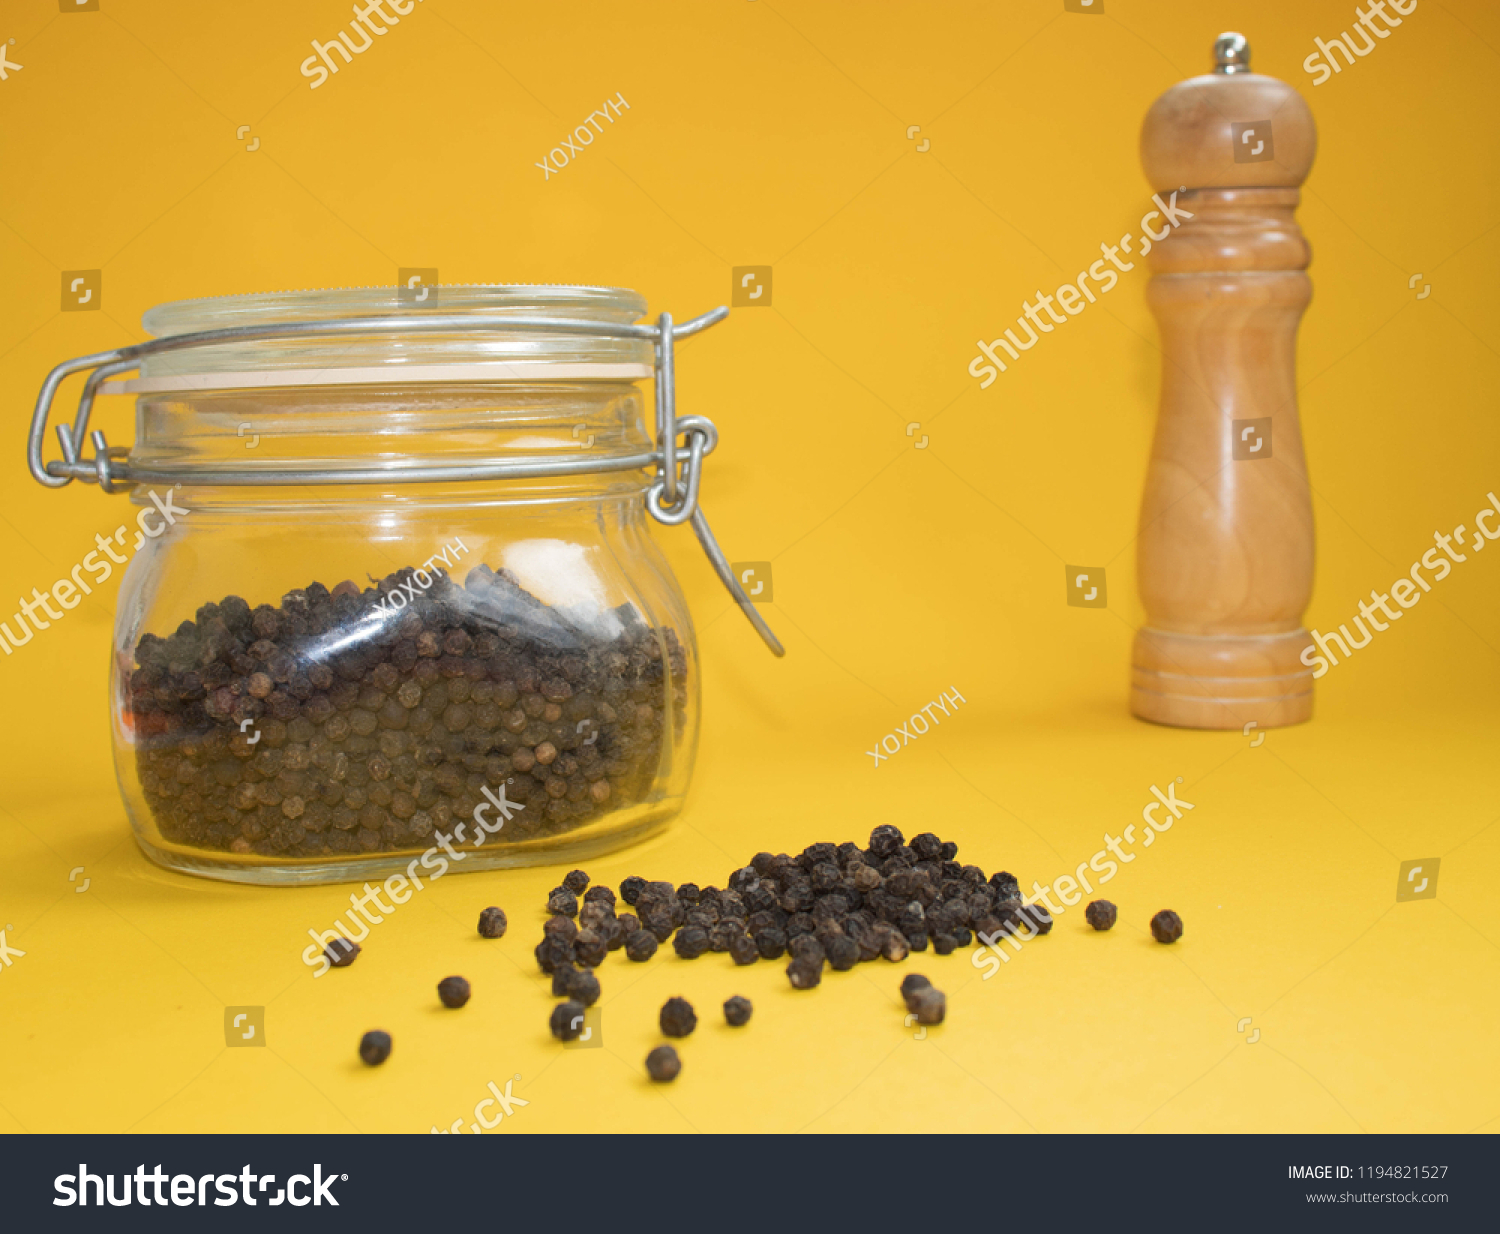 Download Black Pepper On Yellow Background Pepper Stock Photo Edit Now 1194821527 PSD Mockup Templates